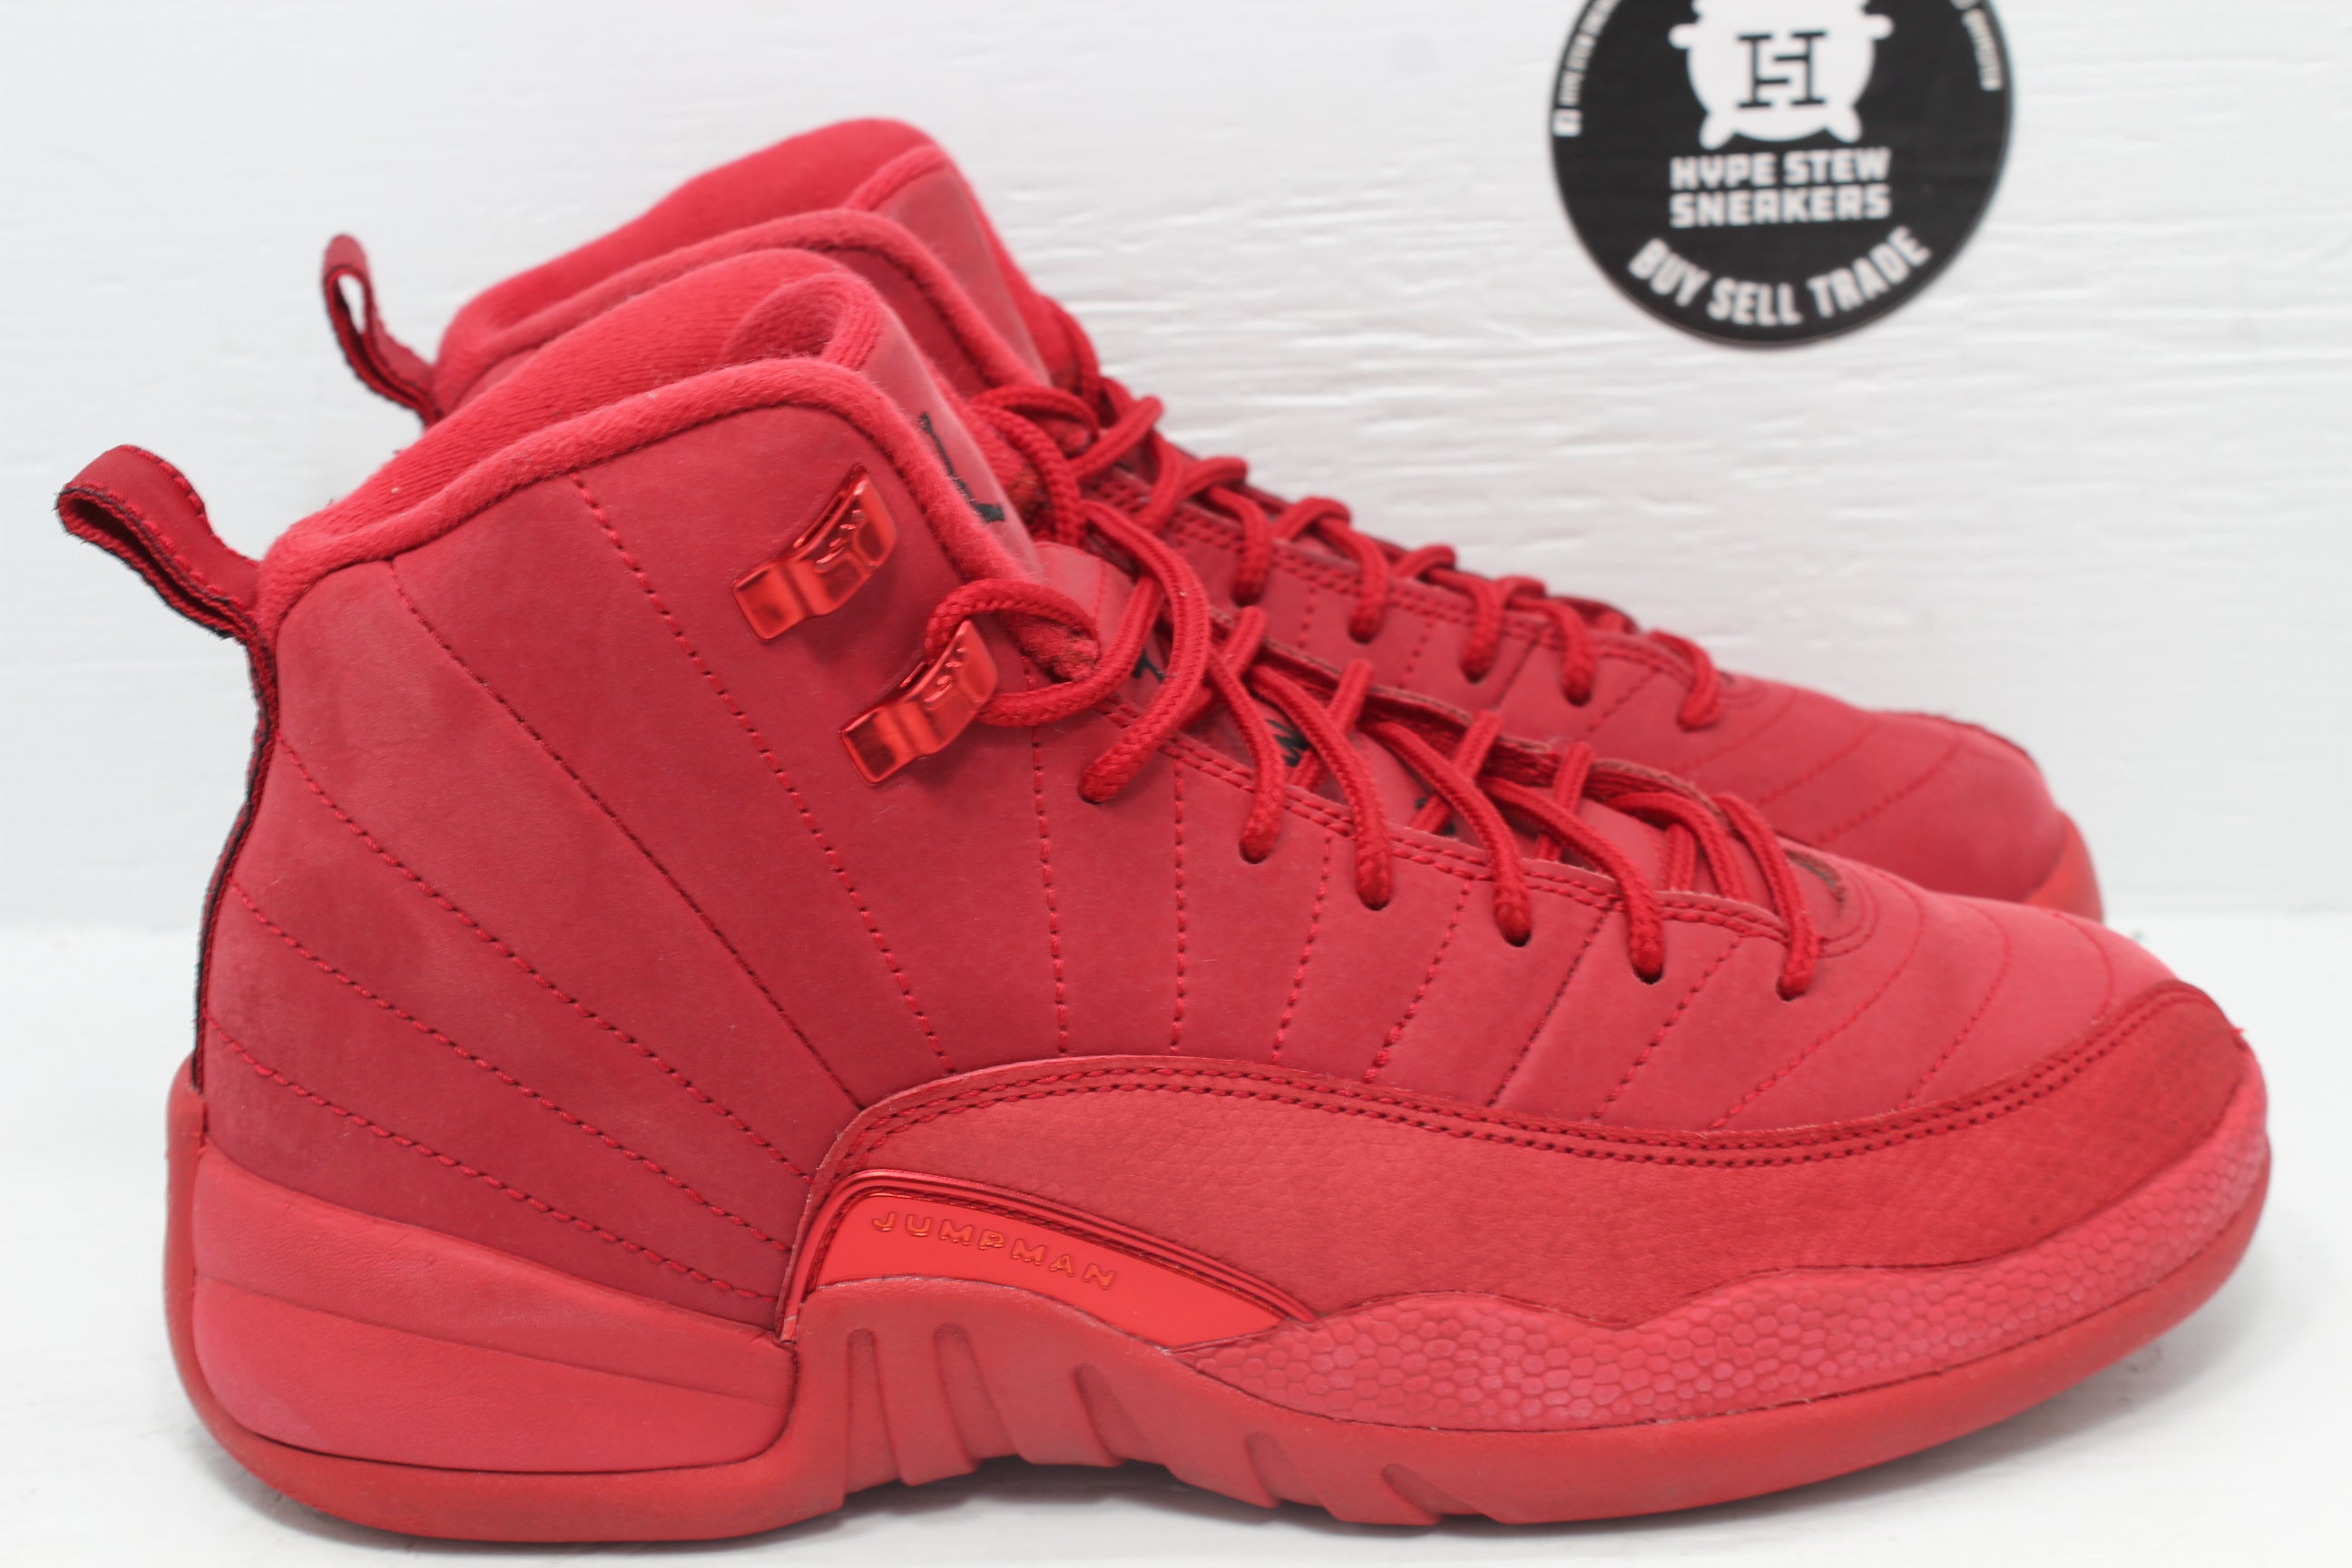 Jordan 12 Retro Gym Red 2018 for Sale, Authenticity Guaranteed